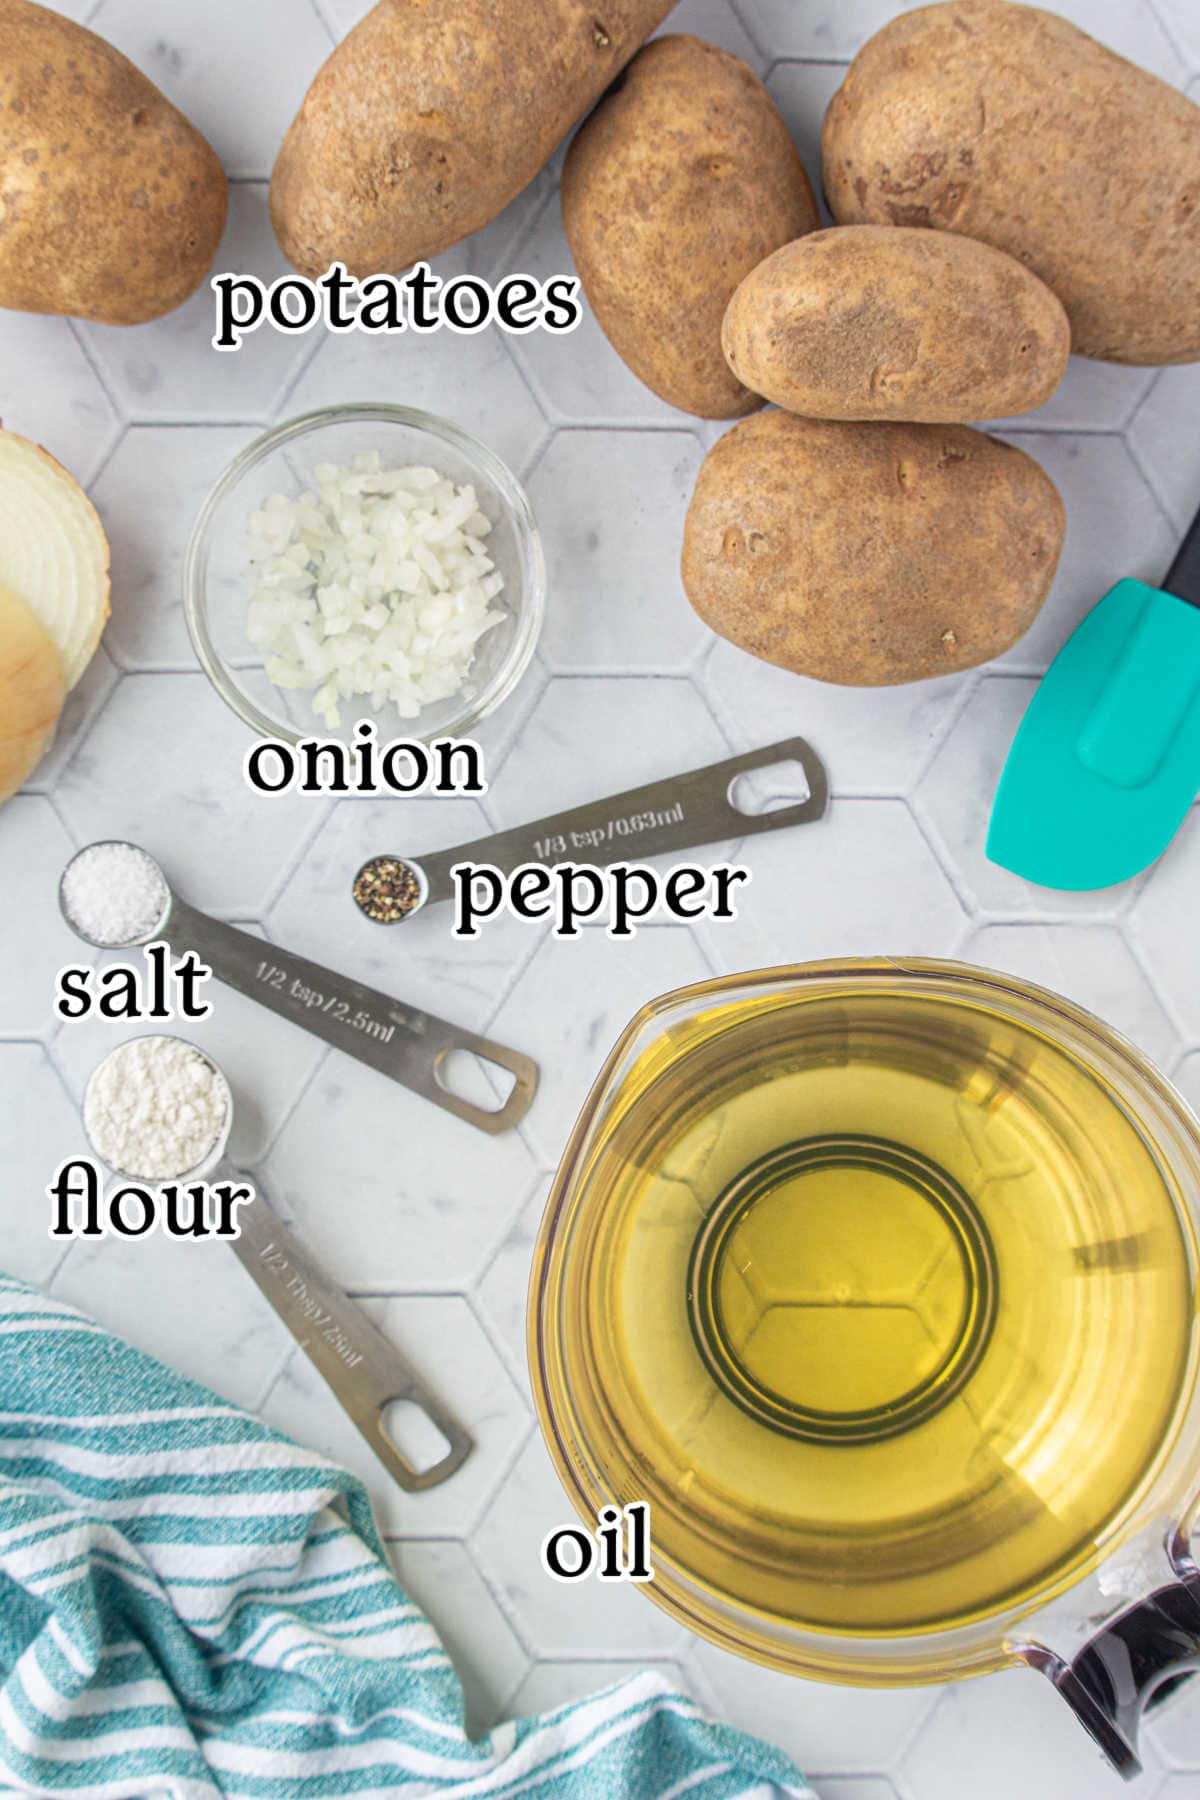 Labeled ingredients for tater tots recipe.